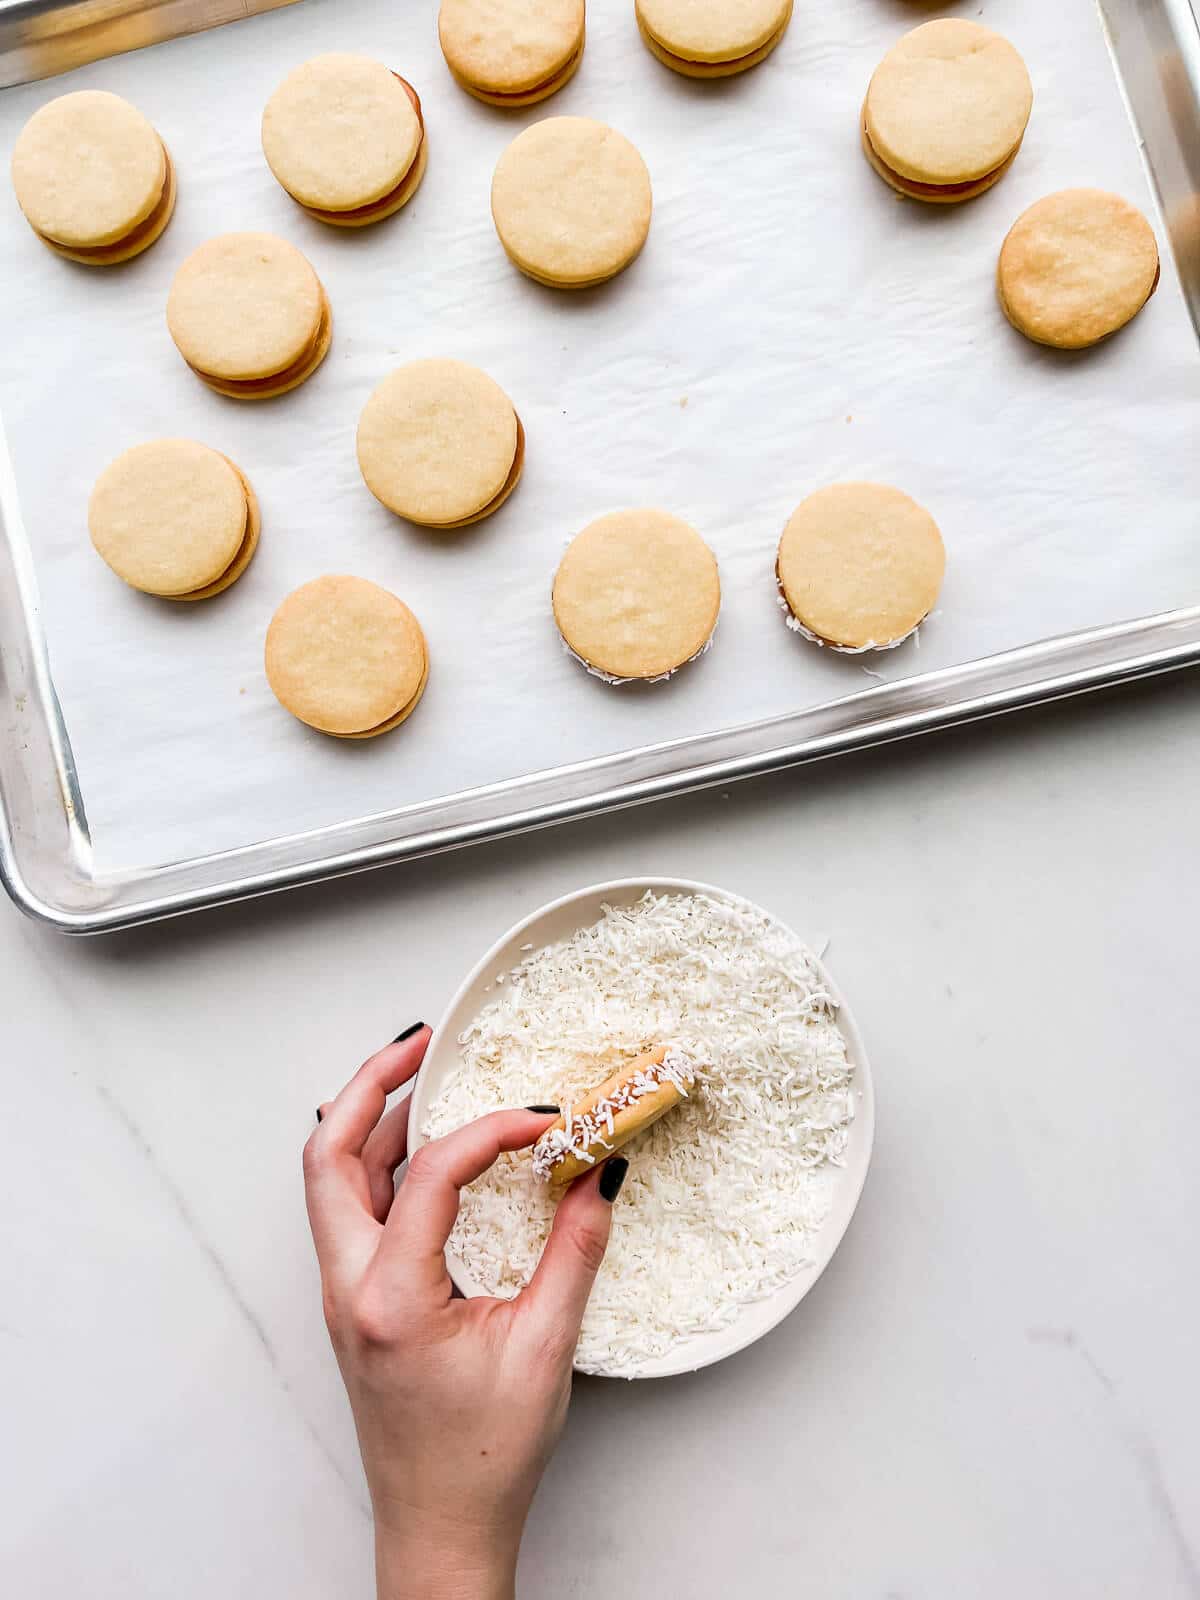 Rolling alfajores cookies in a bowl of coconut to coat the edges.